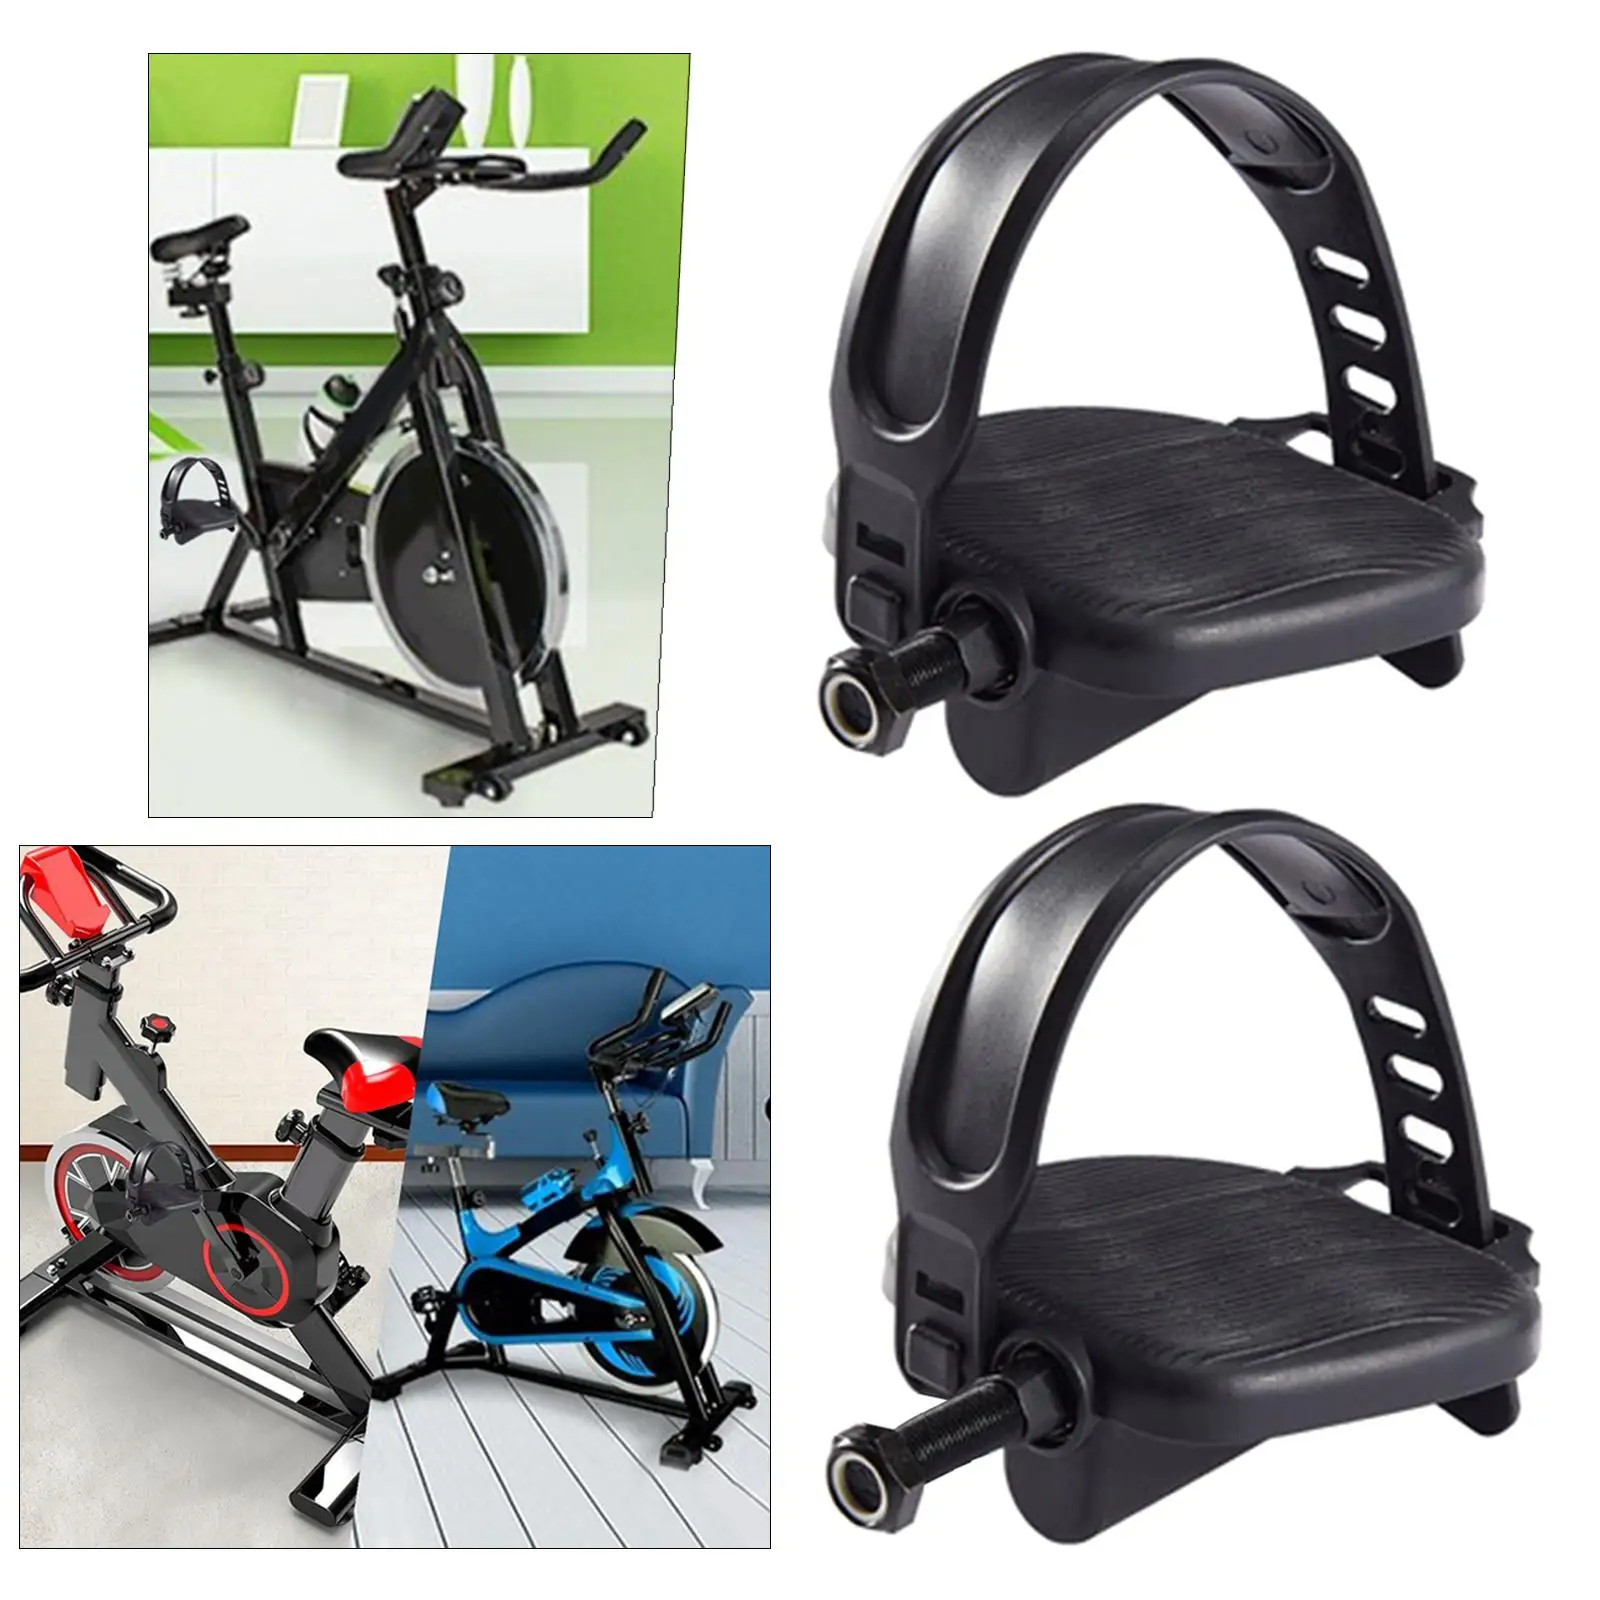 1 Pair Exercise Bike Pedals with Adjustable Straps Fitness Equipment Accessories